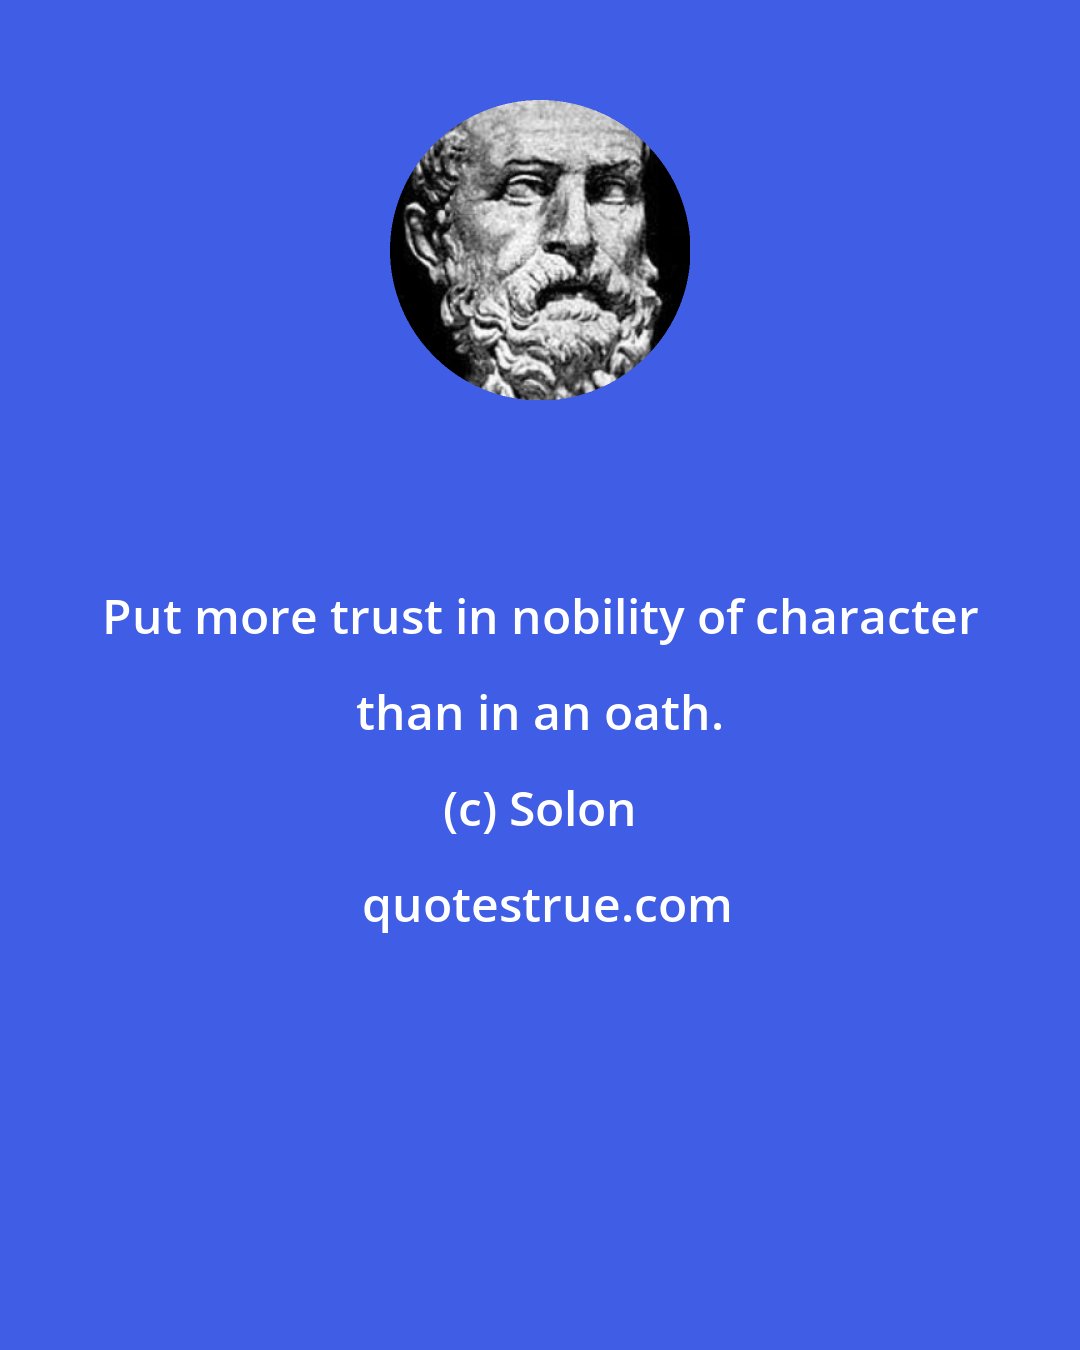 Solon: Put more trust in nobility of character than in an oath.